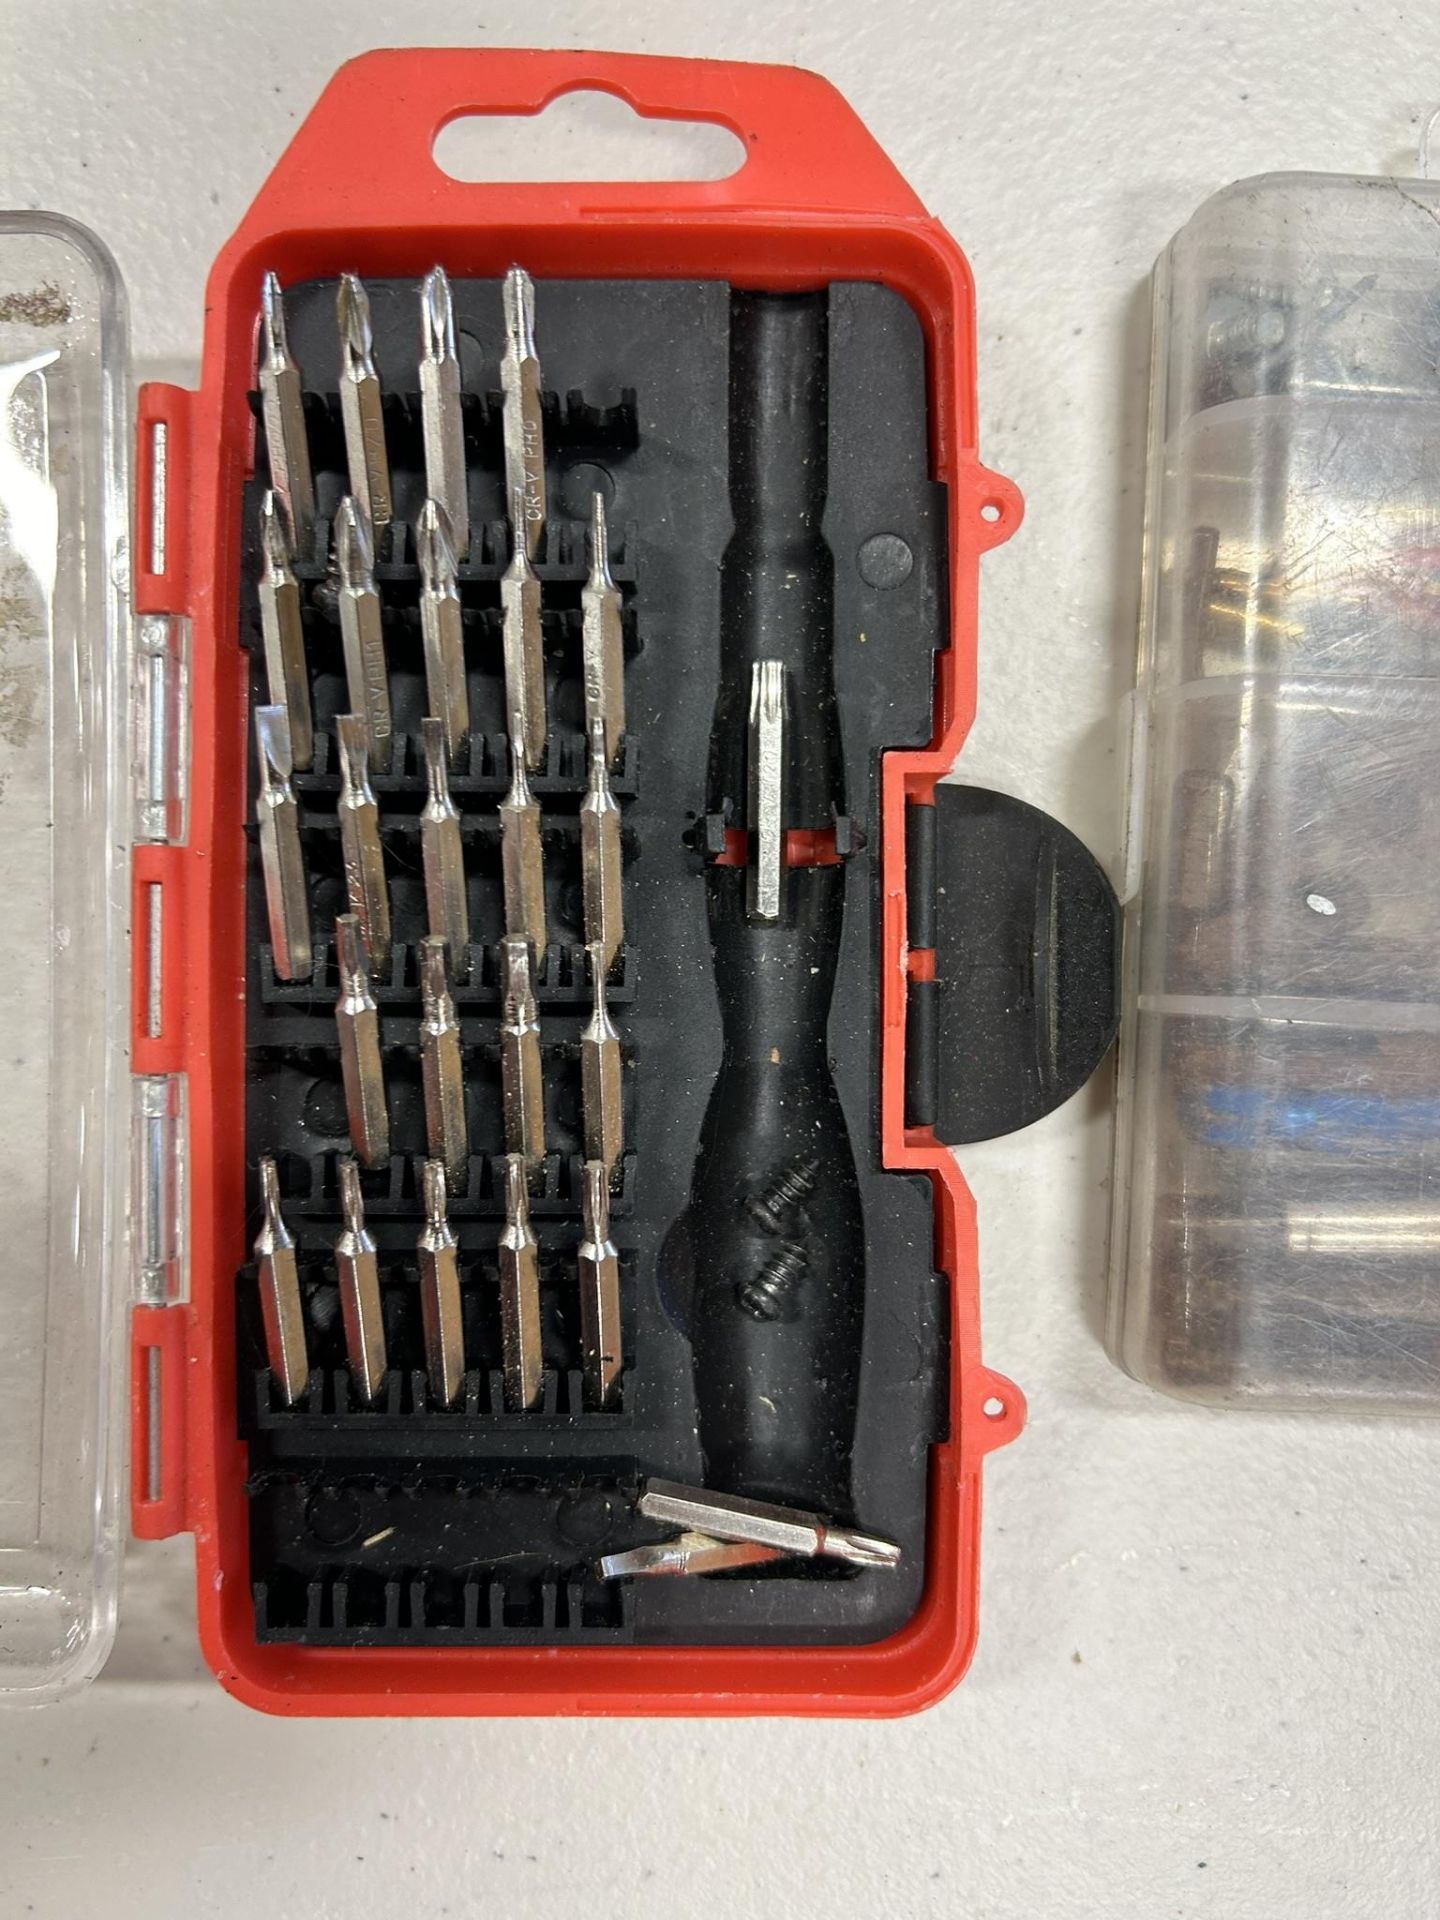 PRECISION DRIVER SET, DRIVER BITS, WIRE STRIPPERS, DRILL BITS, HEX KEYS, ETC. - Image 5 of 11